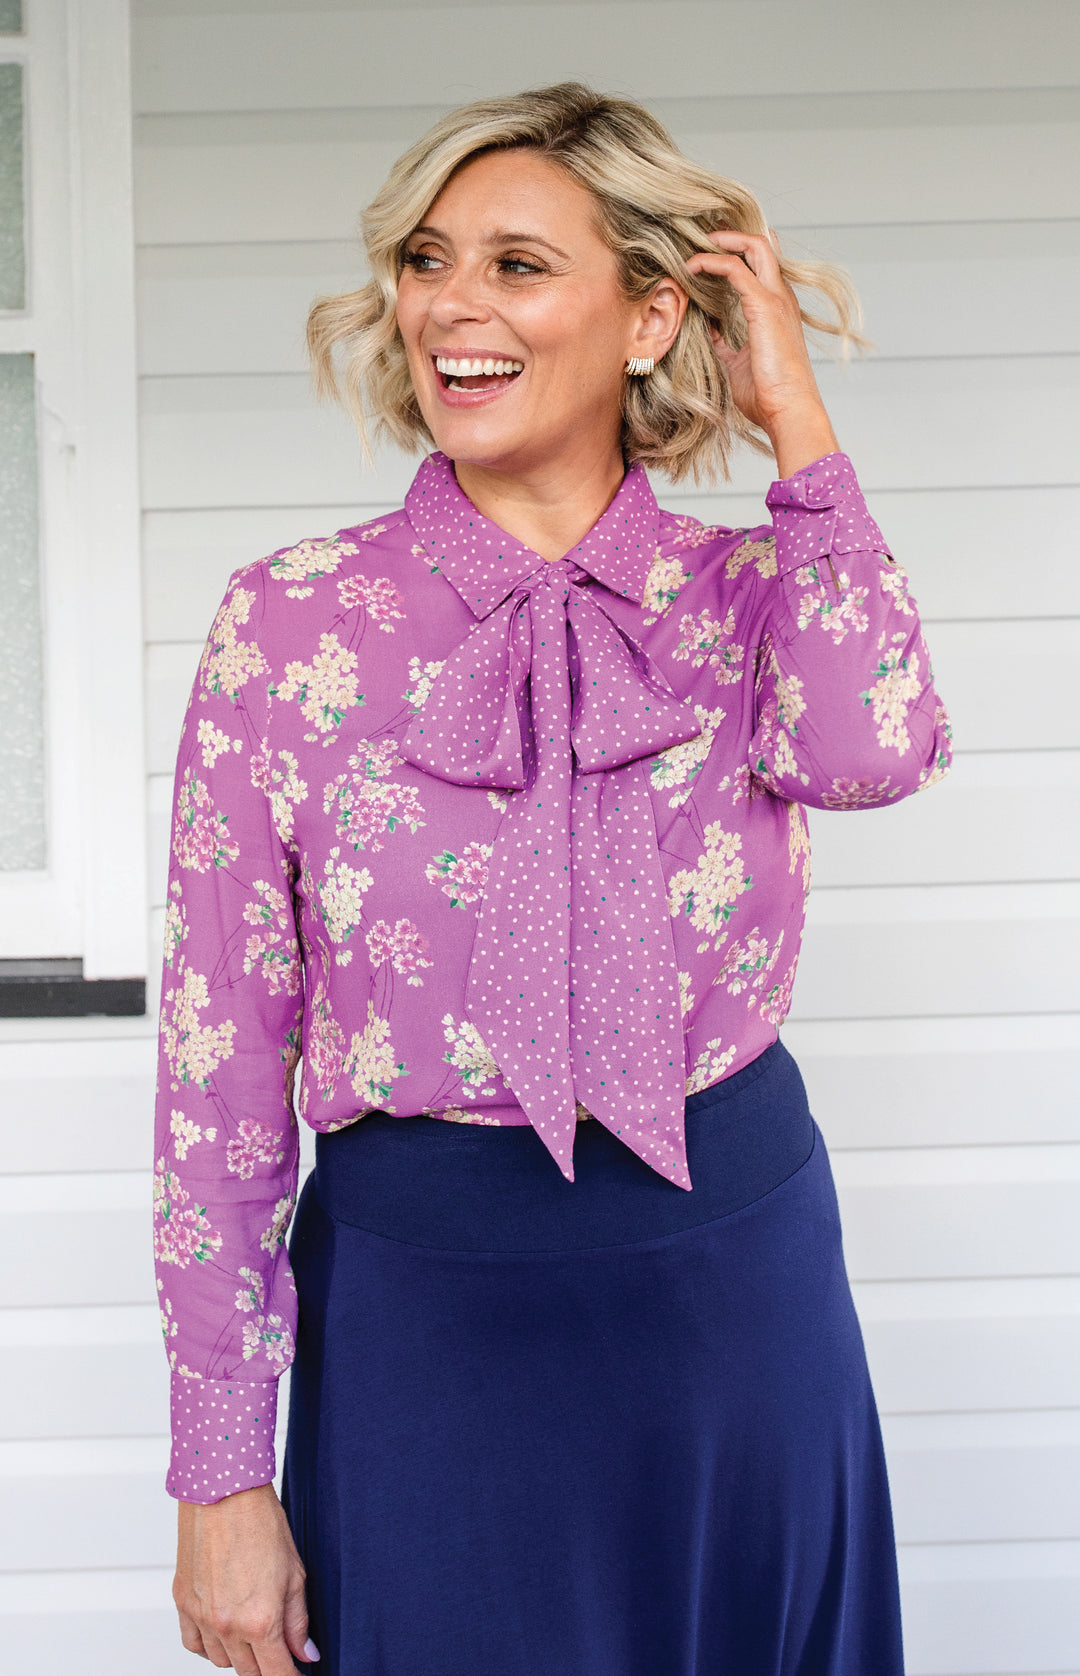 Sam Blouse in the lovely lilac